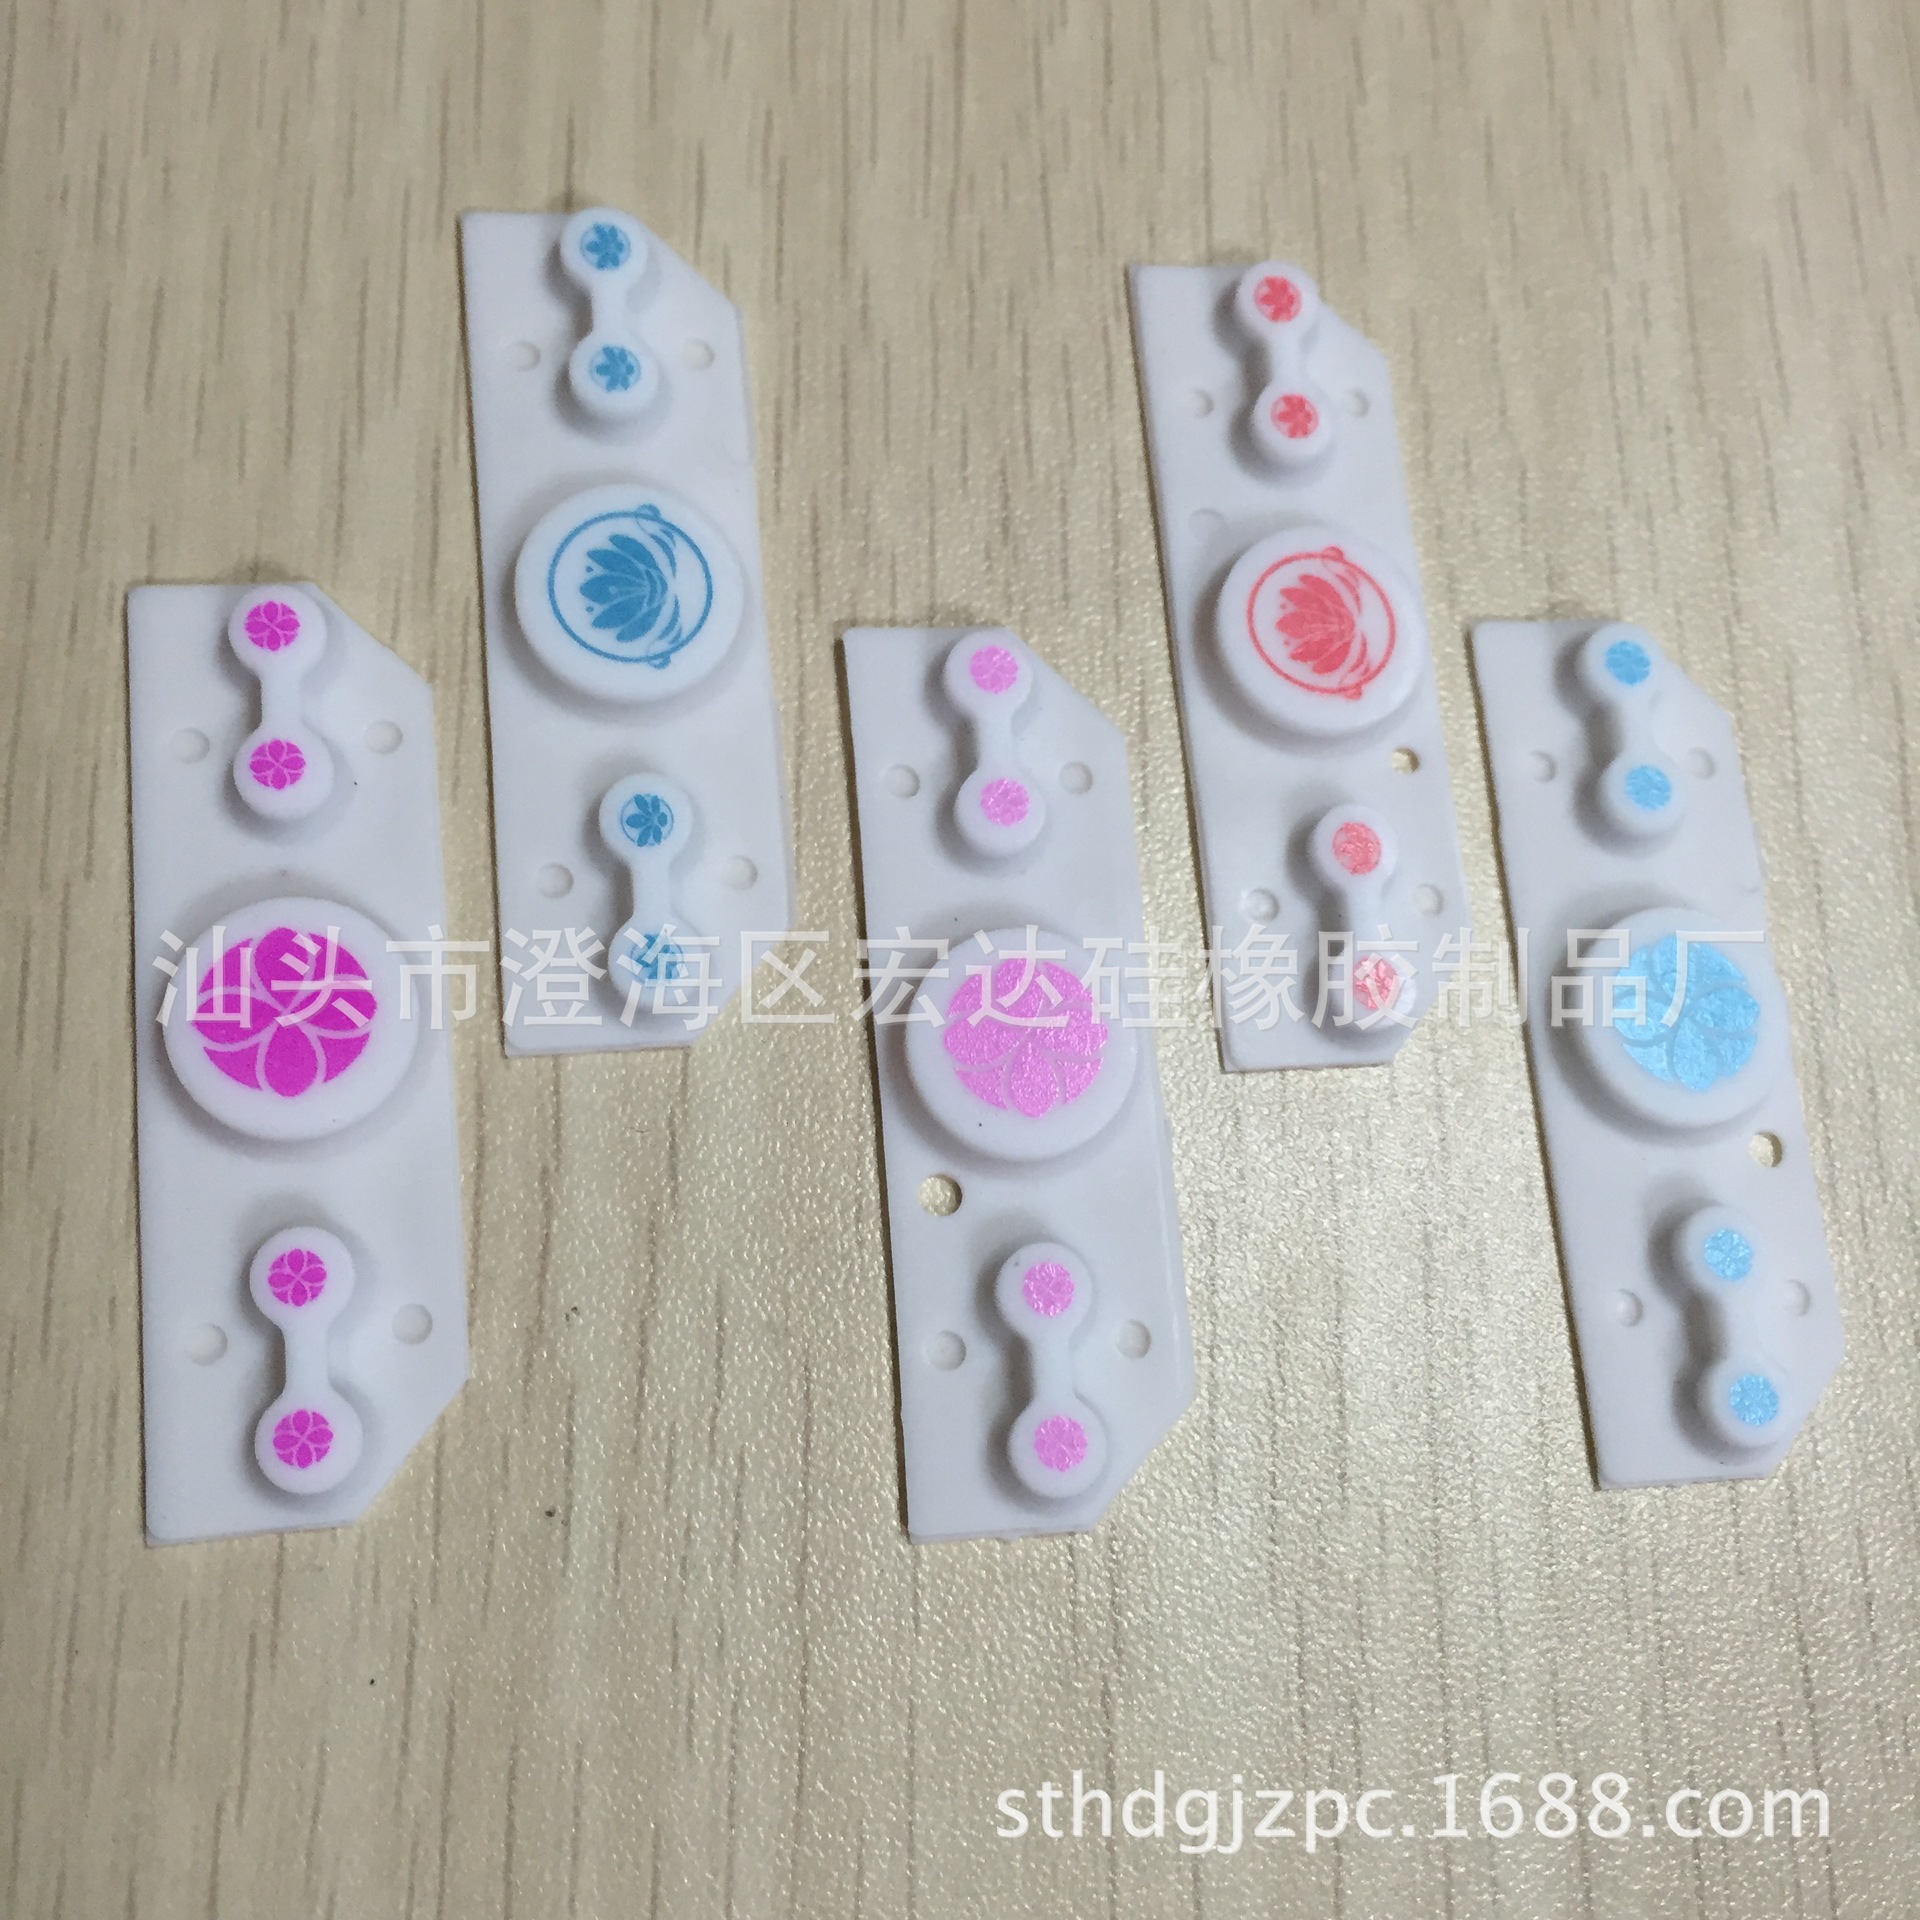 Production of Silicone Products Toy Phone Mobile Phone Button Toy Conducting Resin Toy Electronic Accessories Silicone Button